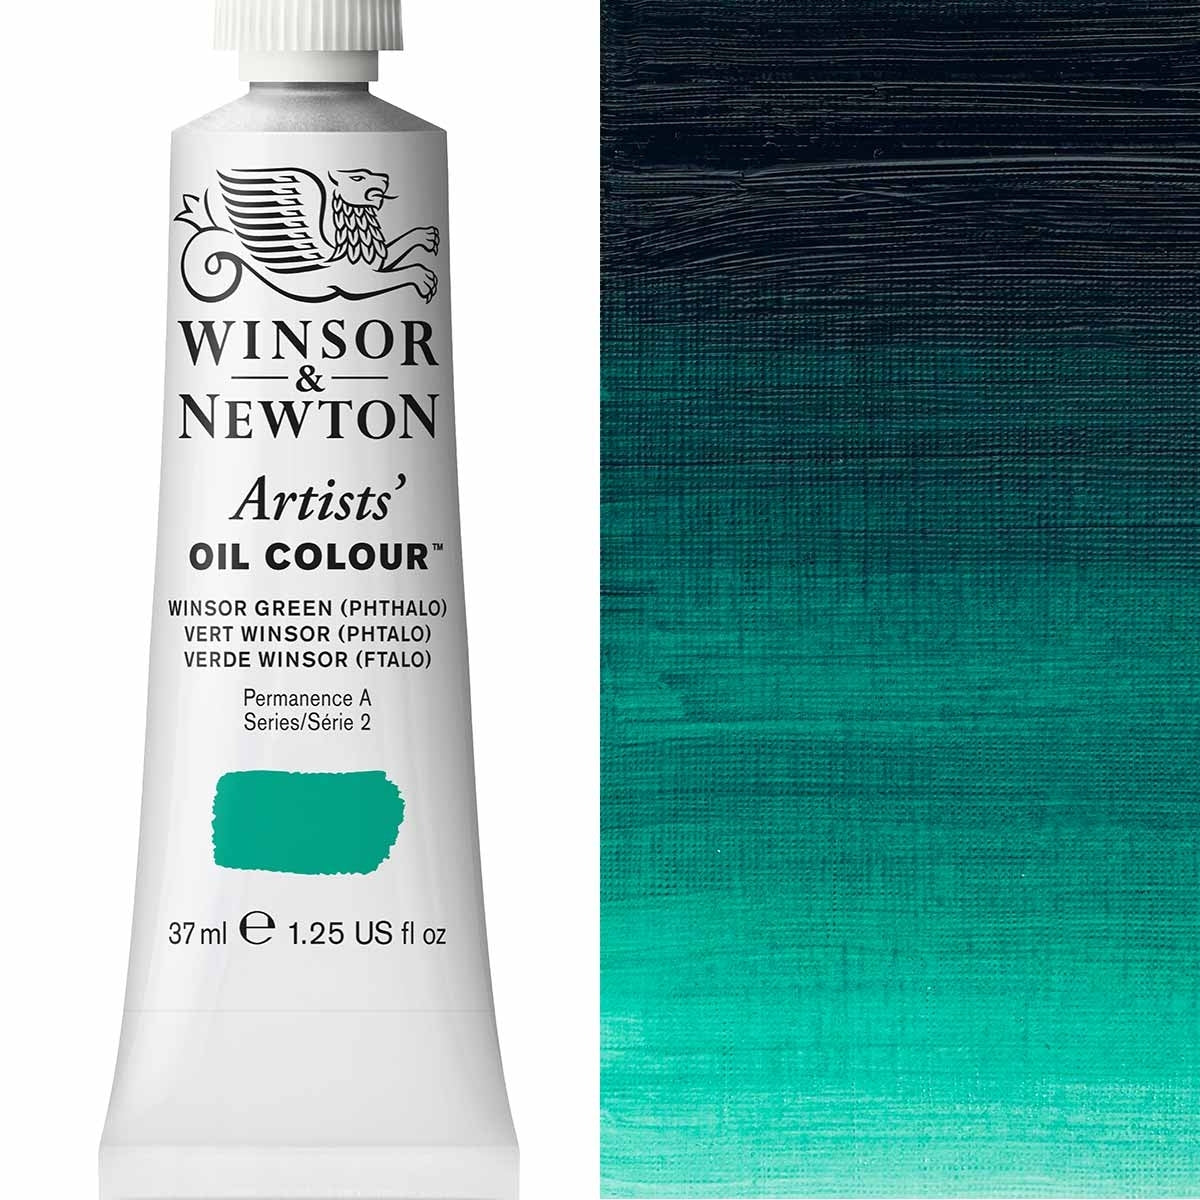 Winsor and Newton - Artists' Oil Colour - 37ml - Winsor Green